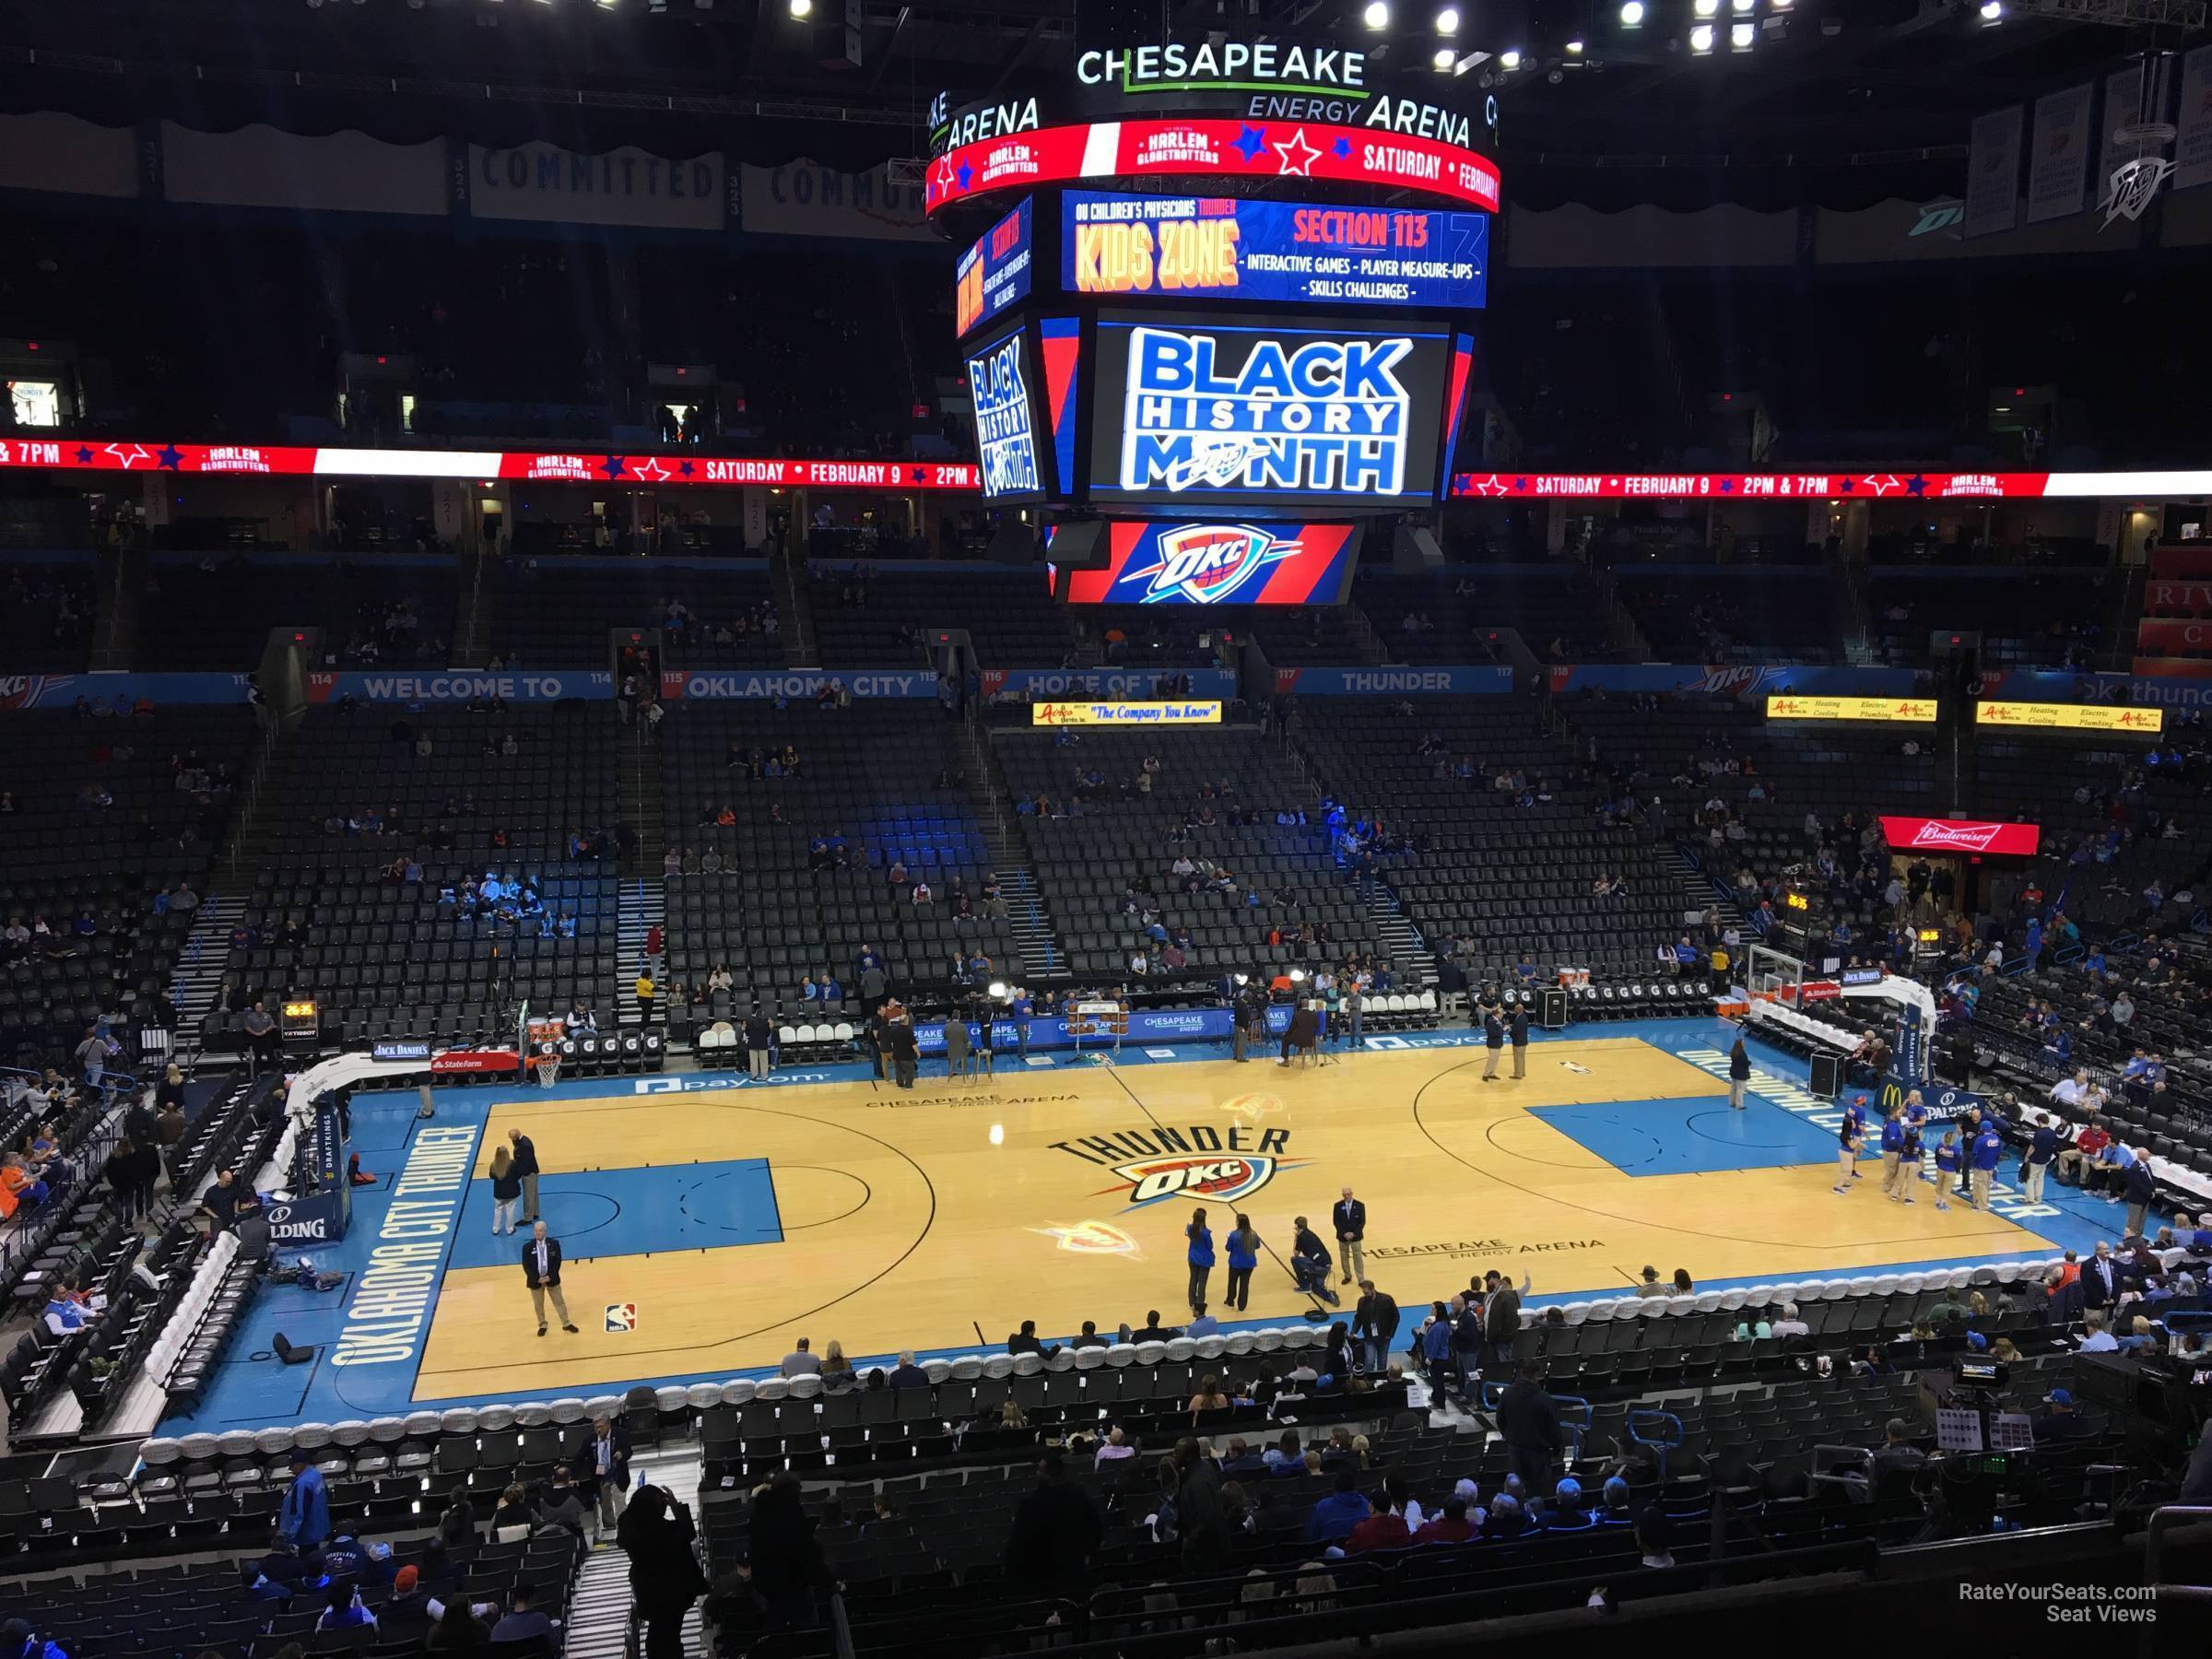 section 209, row h seat view  for basketball - paycom center